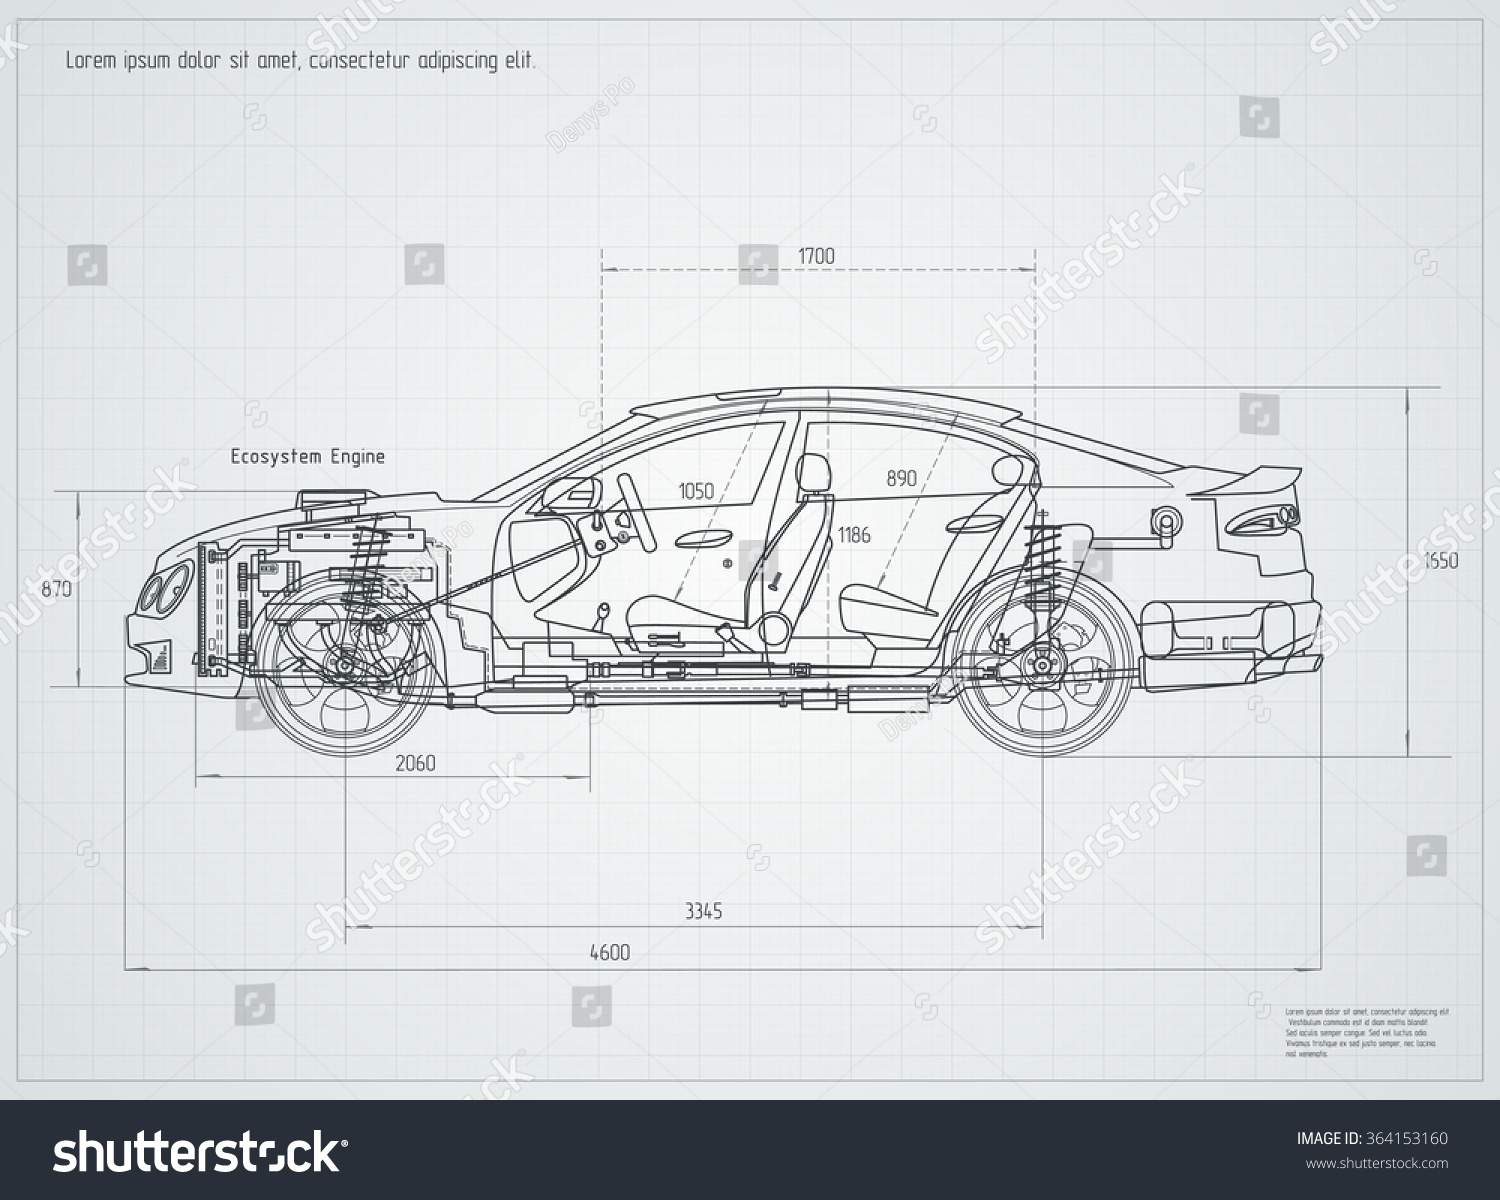 Detailed Engineering drawing of the car. Vector illustration
 #364153160